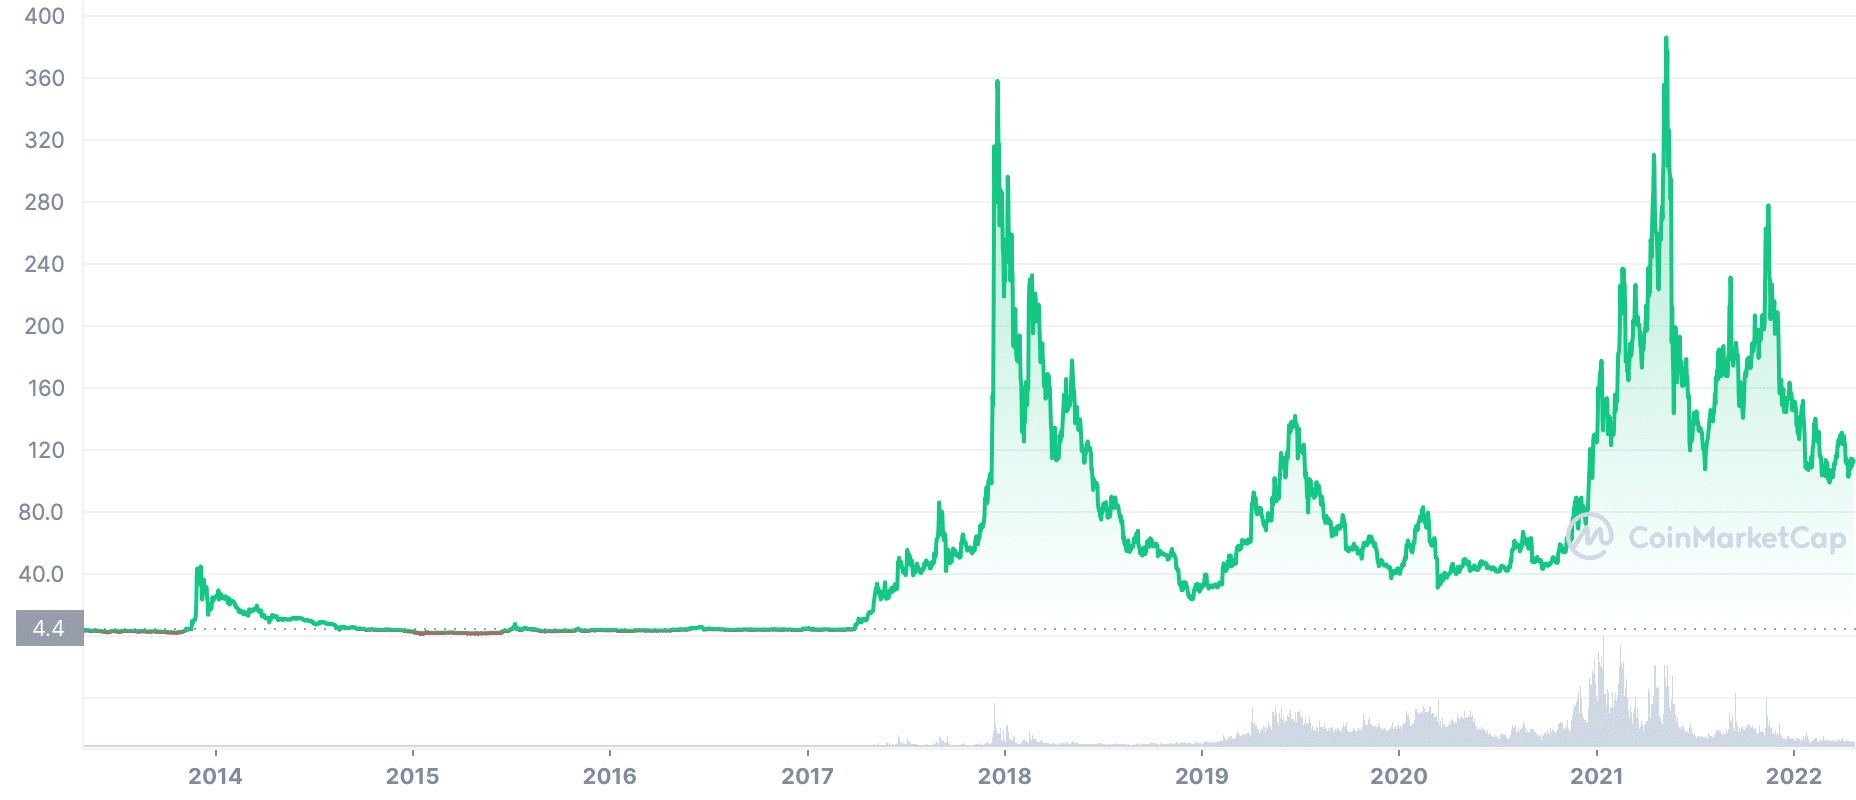 How high will Litecoin be in 5 years?